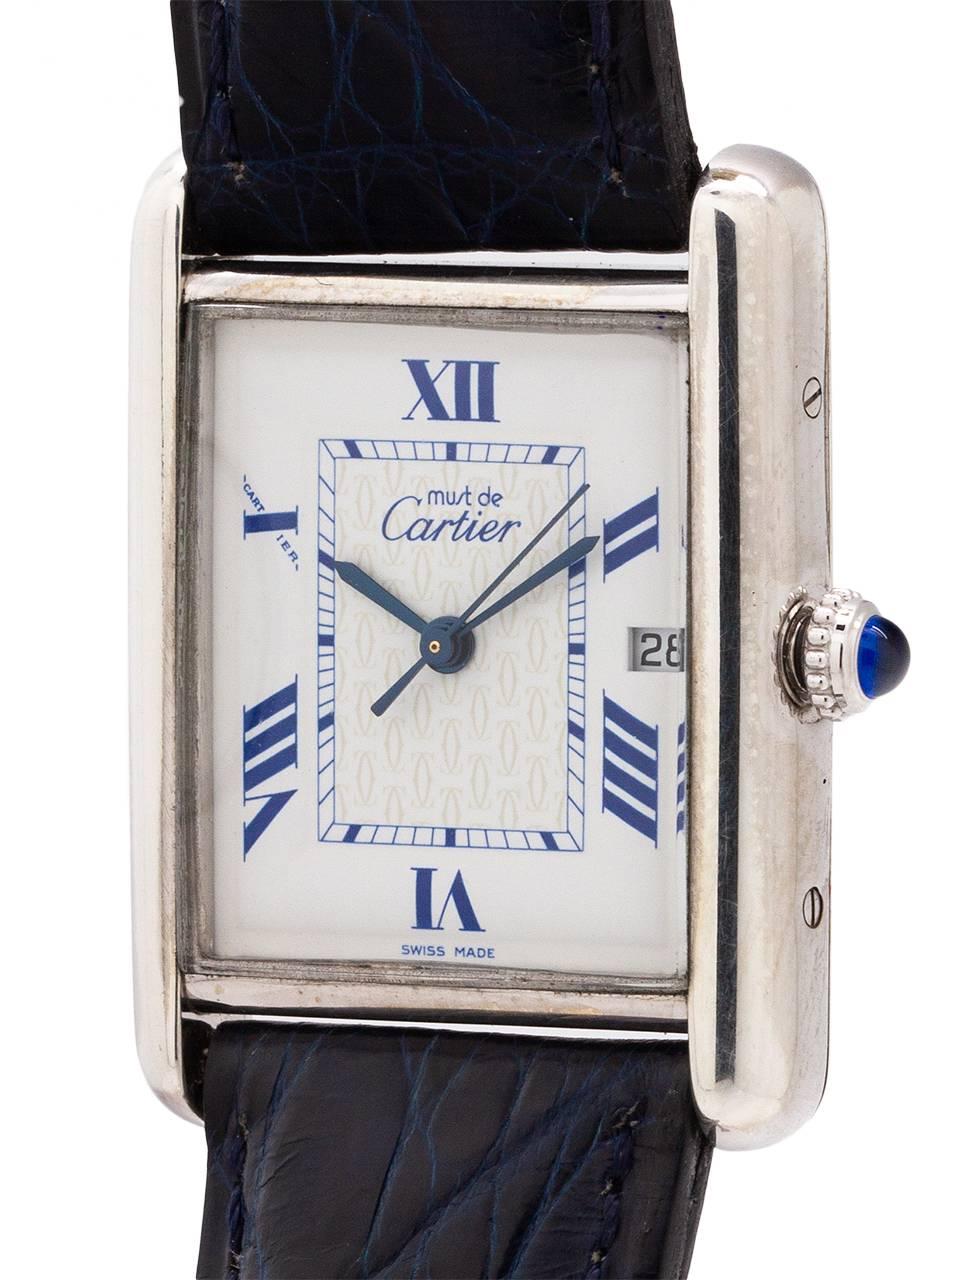 
Cartier Man’s Tank Louis, ref 2414 circa 2000s larger size sterling silver 25 x 35mm water resistant style case secured by 8 case back screws and blue cabochon sapphire crown. Off white dial signed must de Cartier, with even number Roman numerals